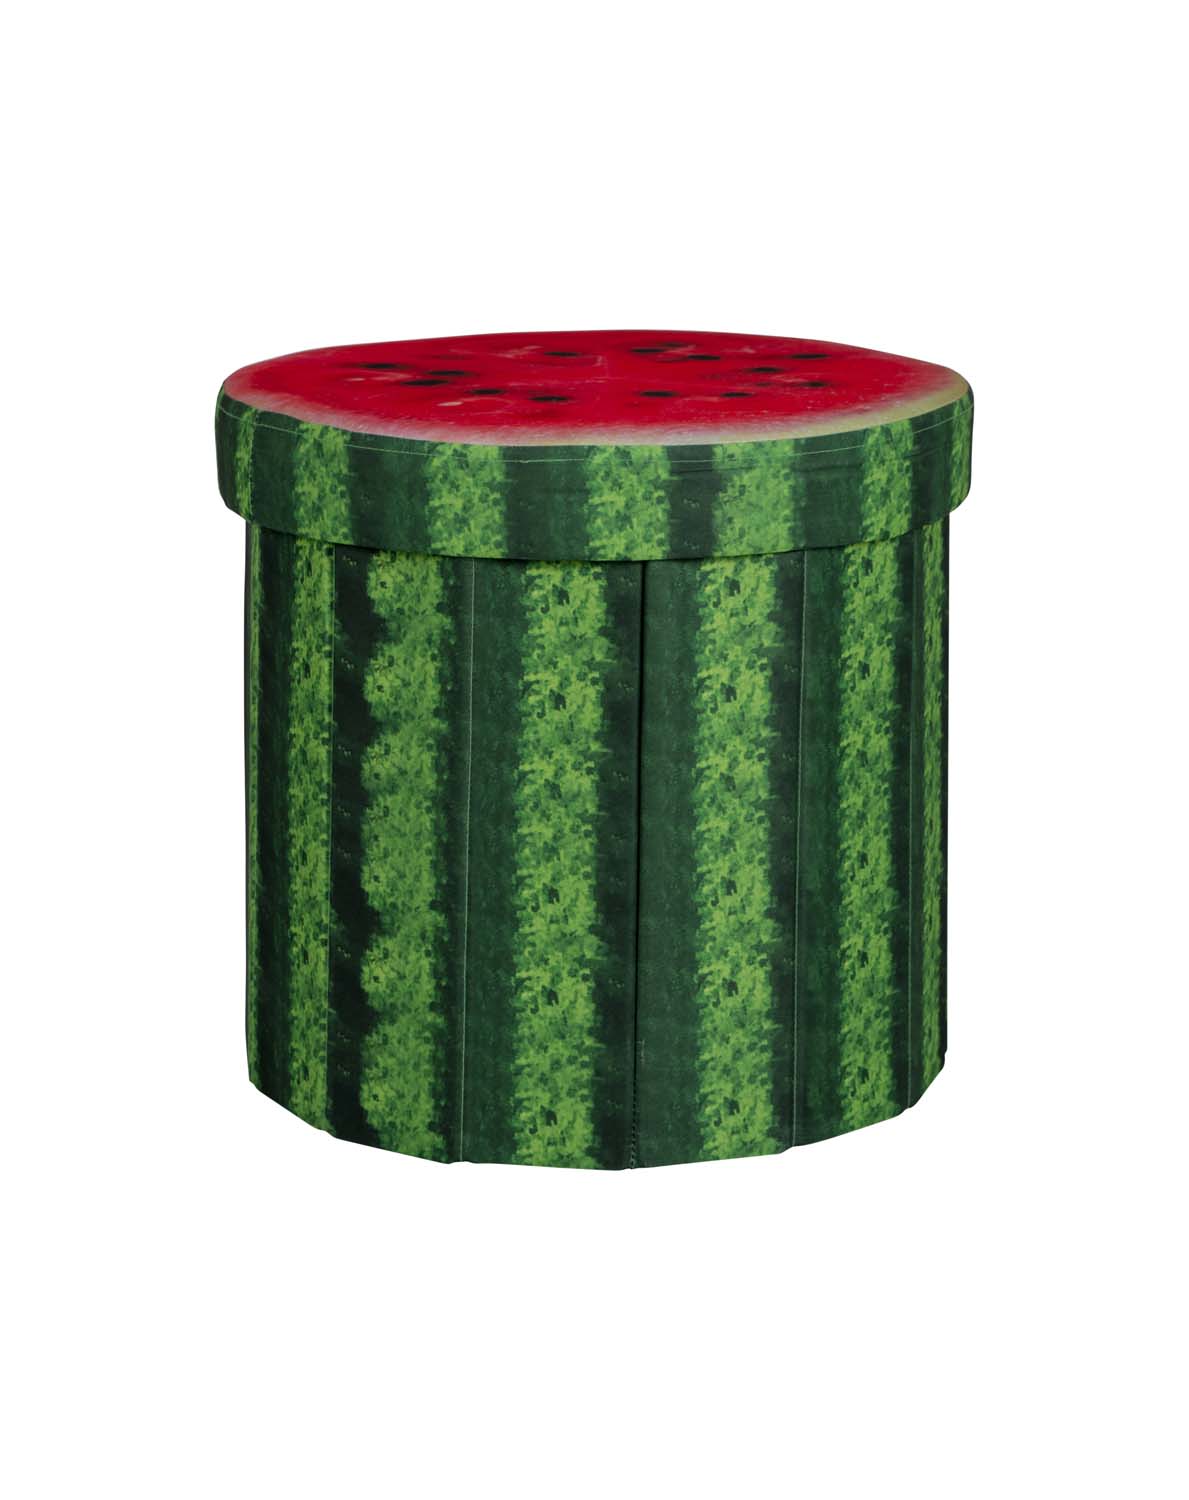 1609331 A trendy Ottoman in a printed pattern. Suitable for storage purposes but also quite comfortable to sit on. The lid is strengthened with MDF.